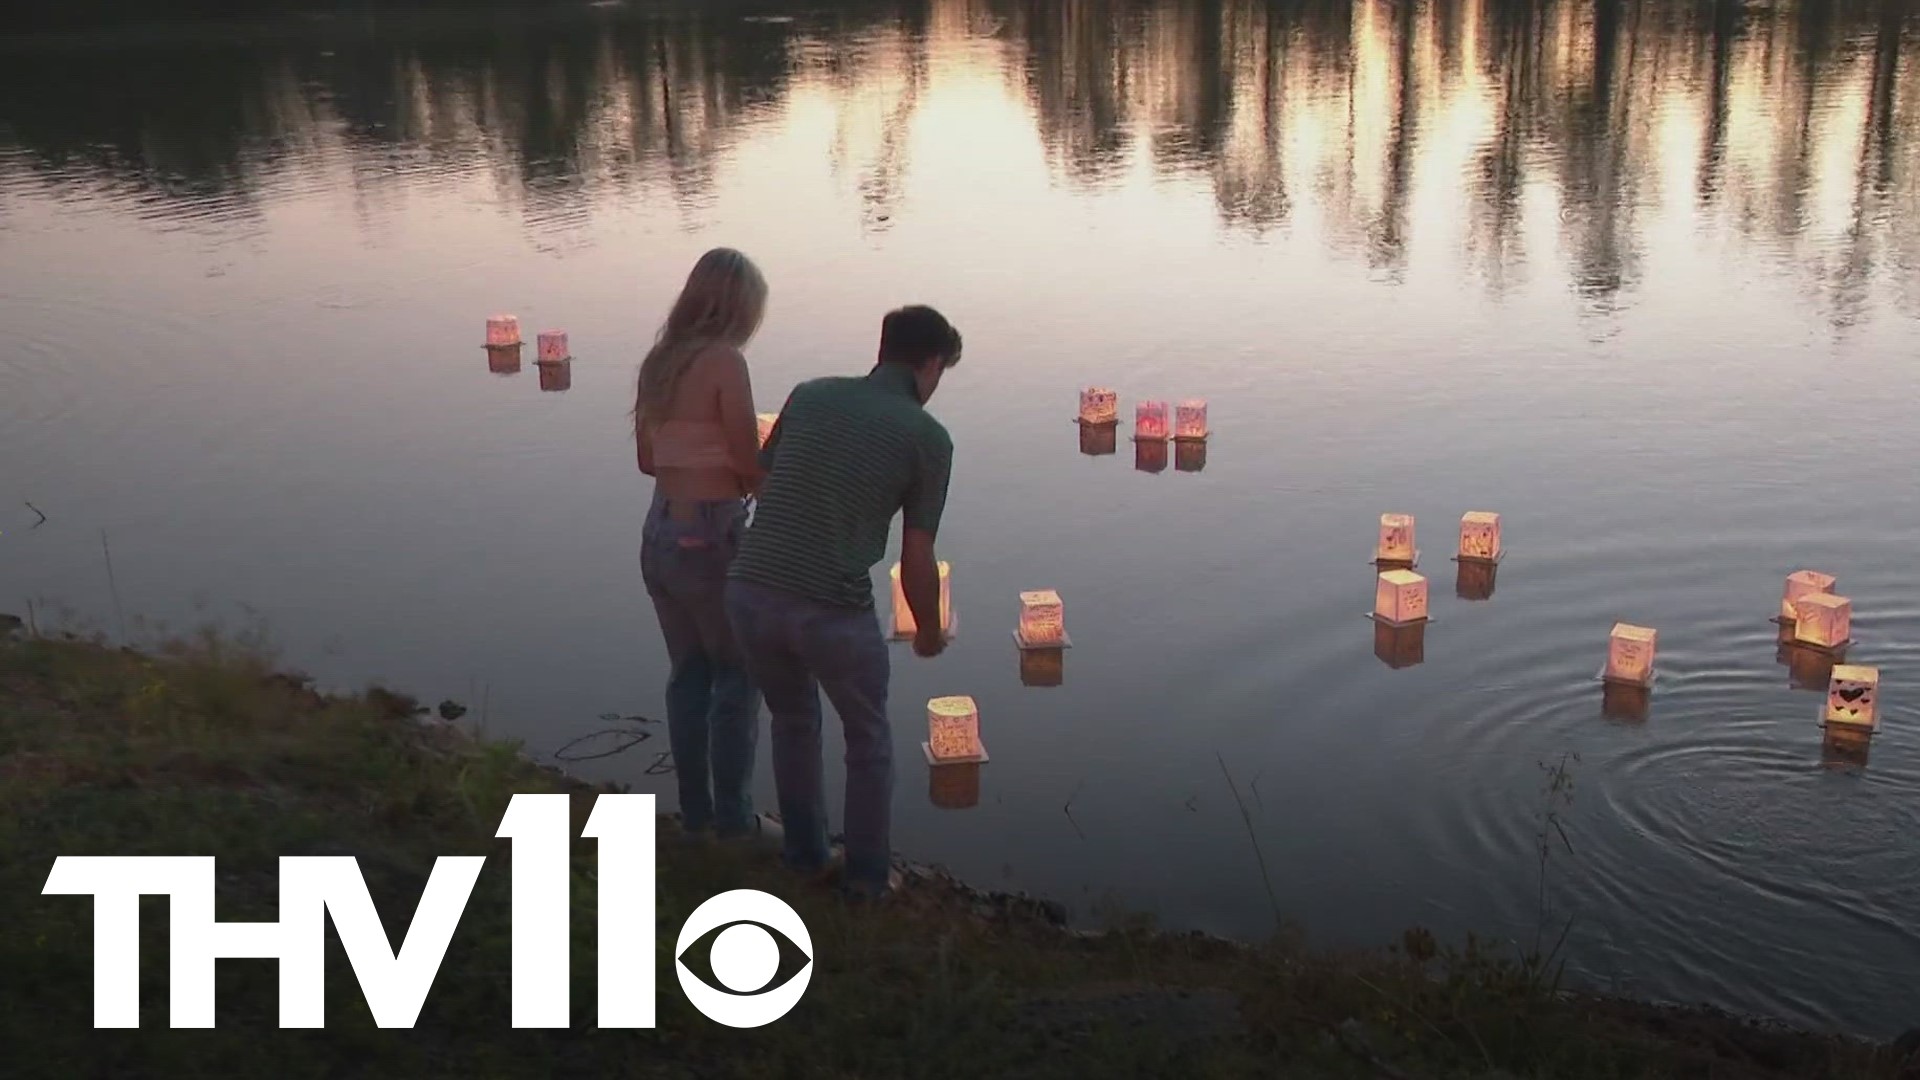 The Water Lantern Festival made its way to Central Arkansas this weekend and we're looking into how the lanterns are lighting up people's lives.